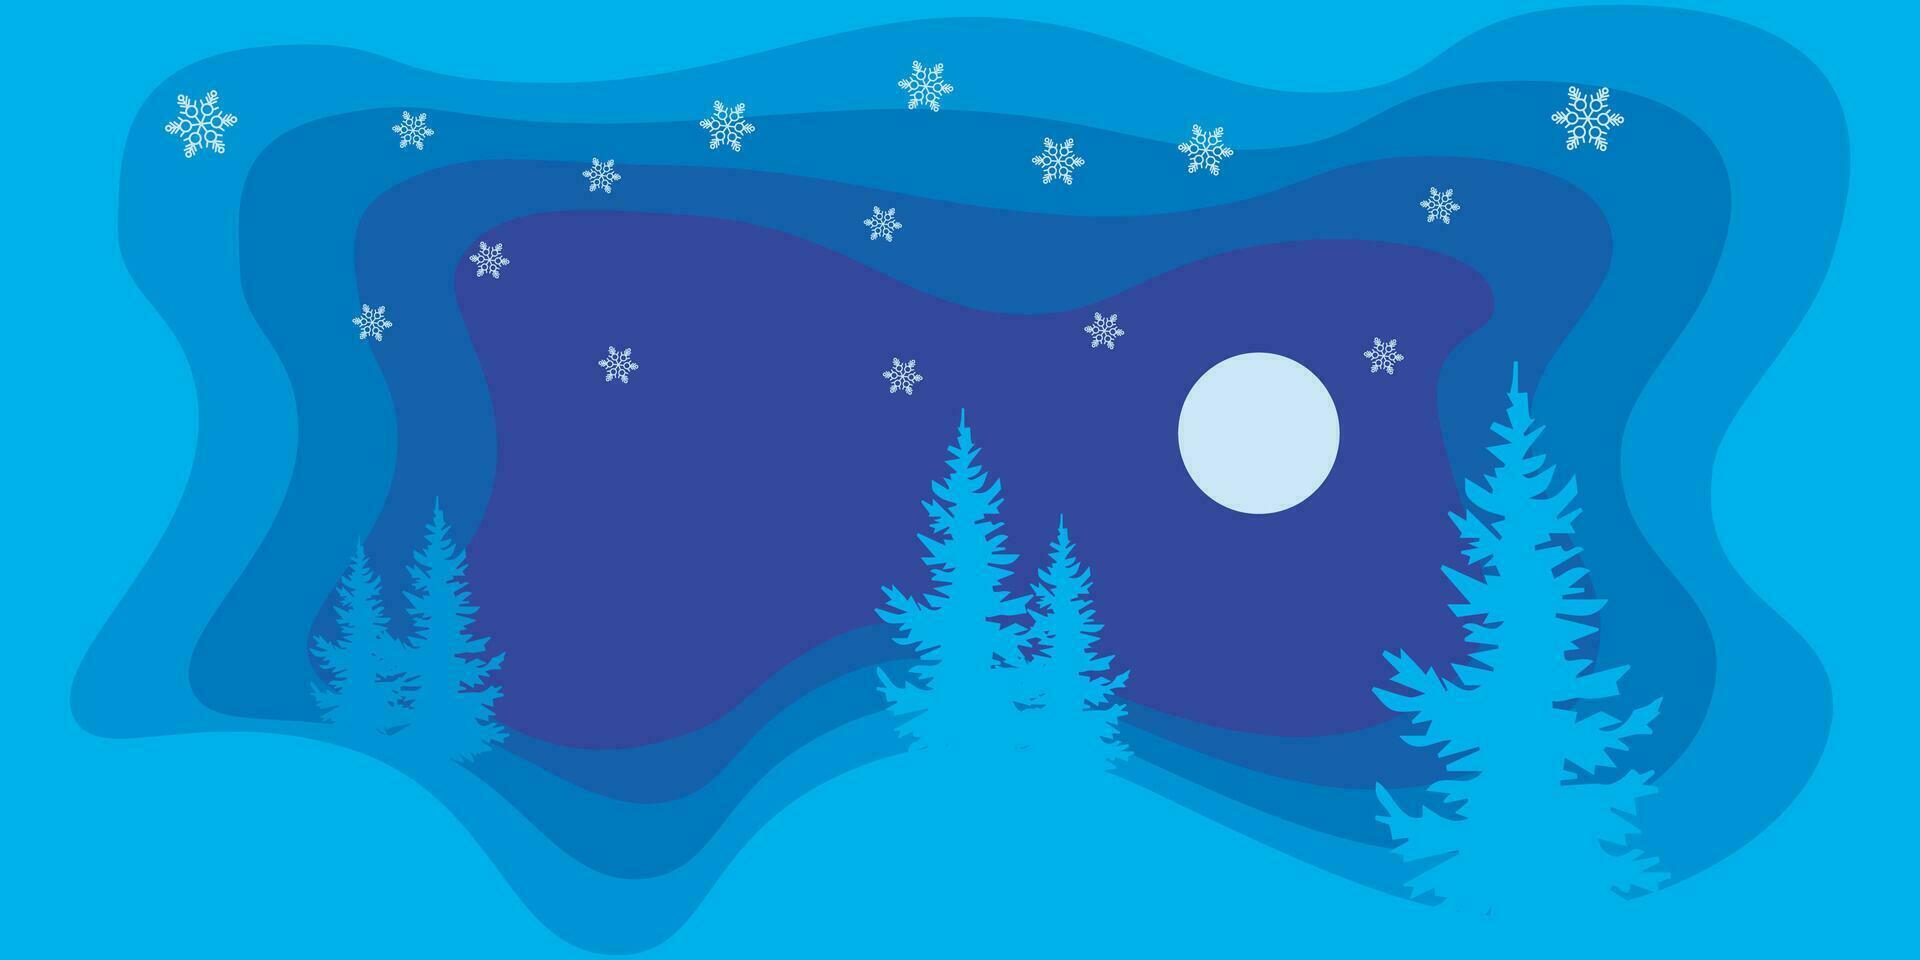 Background design with winter paper cut composition with deer. vector